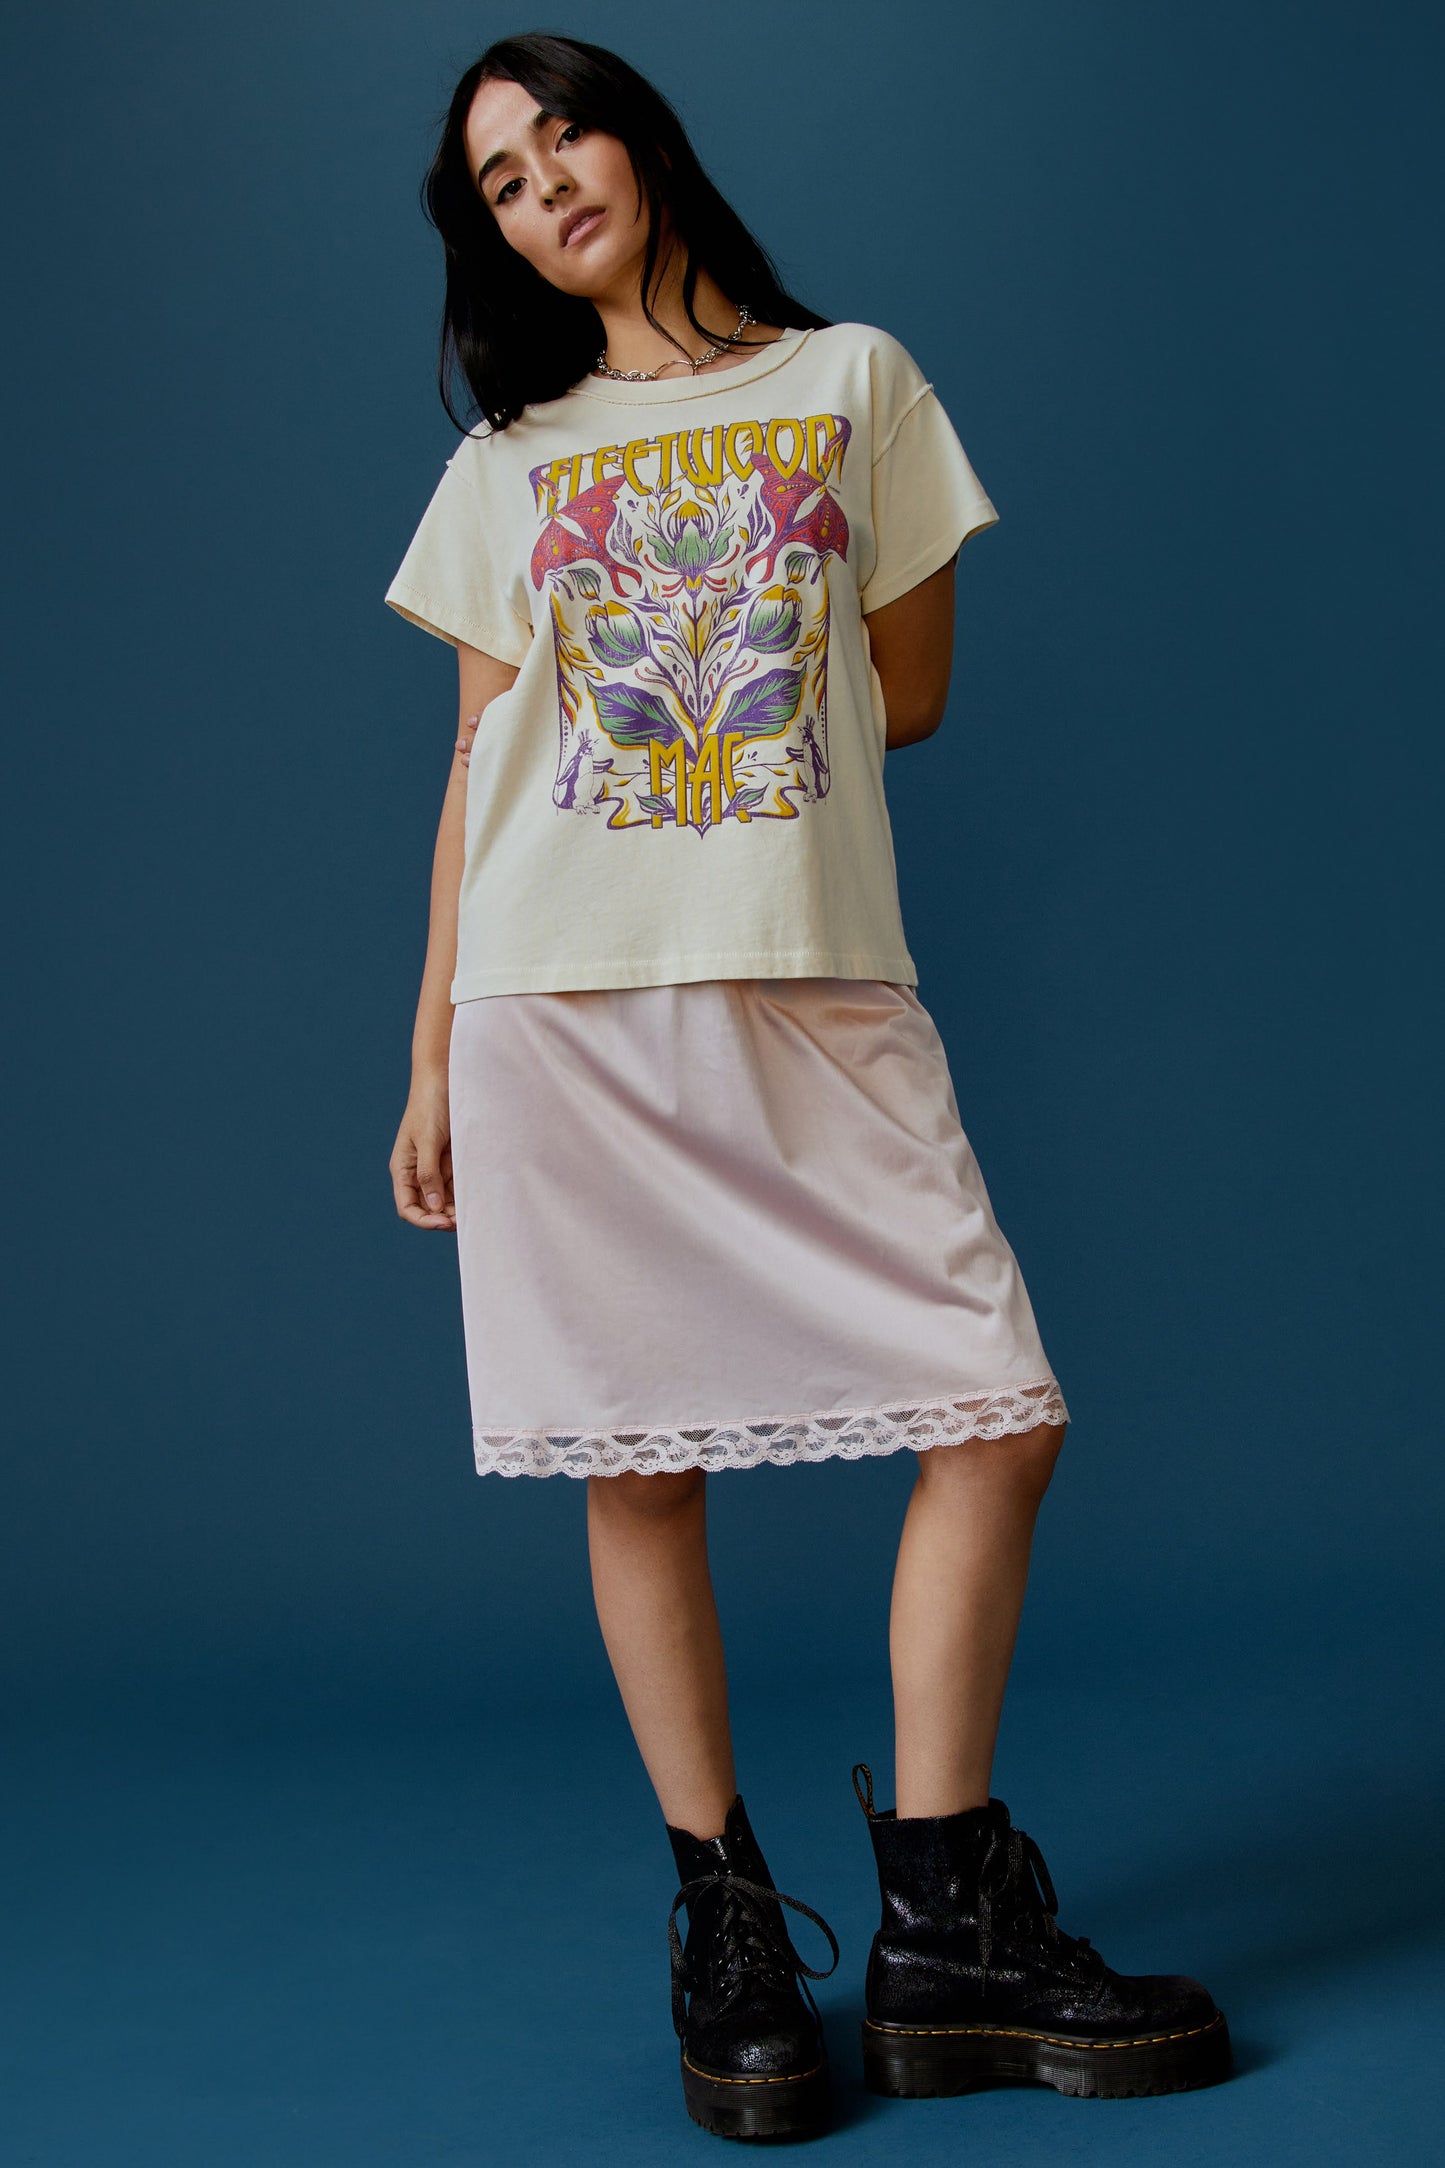 A dark-haired model featuring a parchment-colored tee stamped with the band's name, designed with a graphic of leaves, flowers, and butterflies on the center.